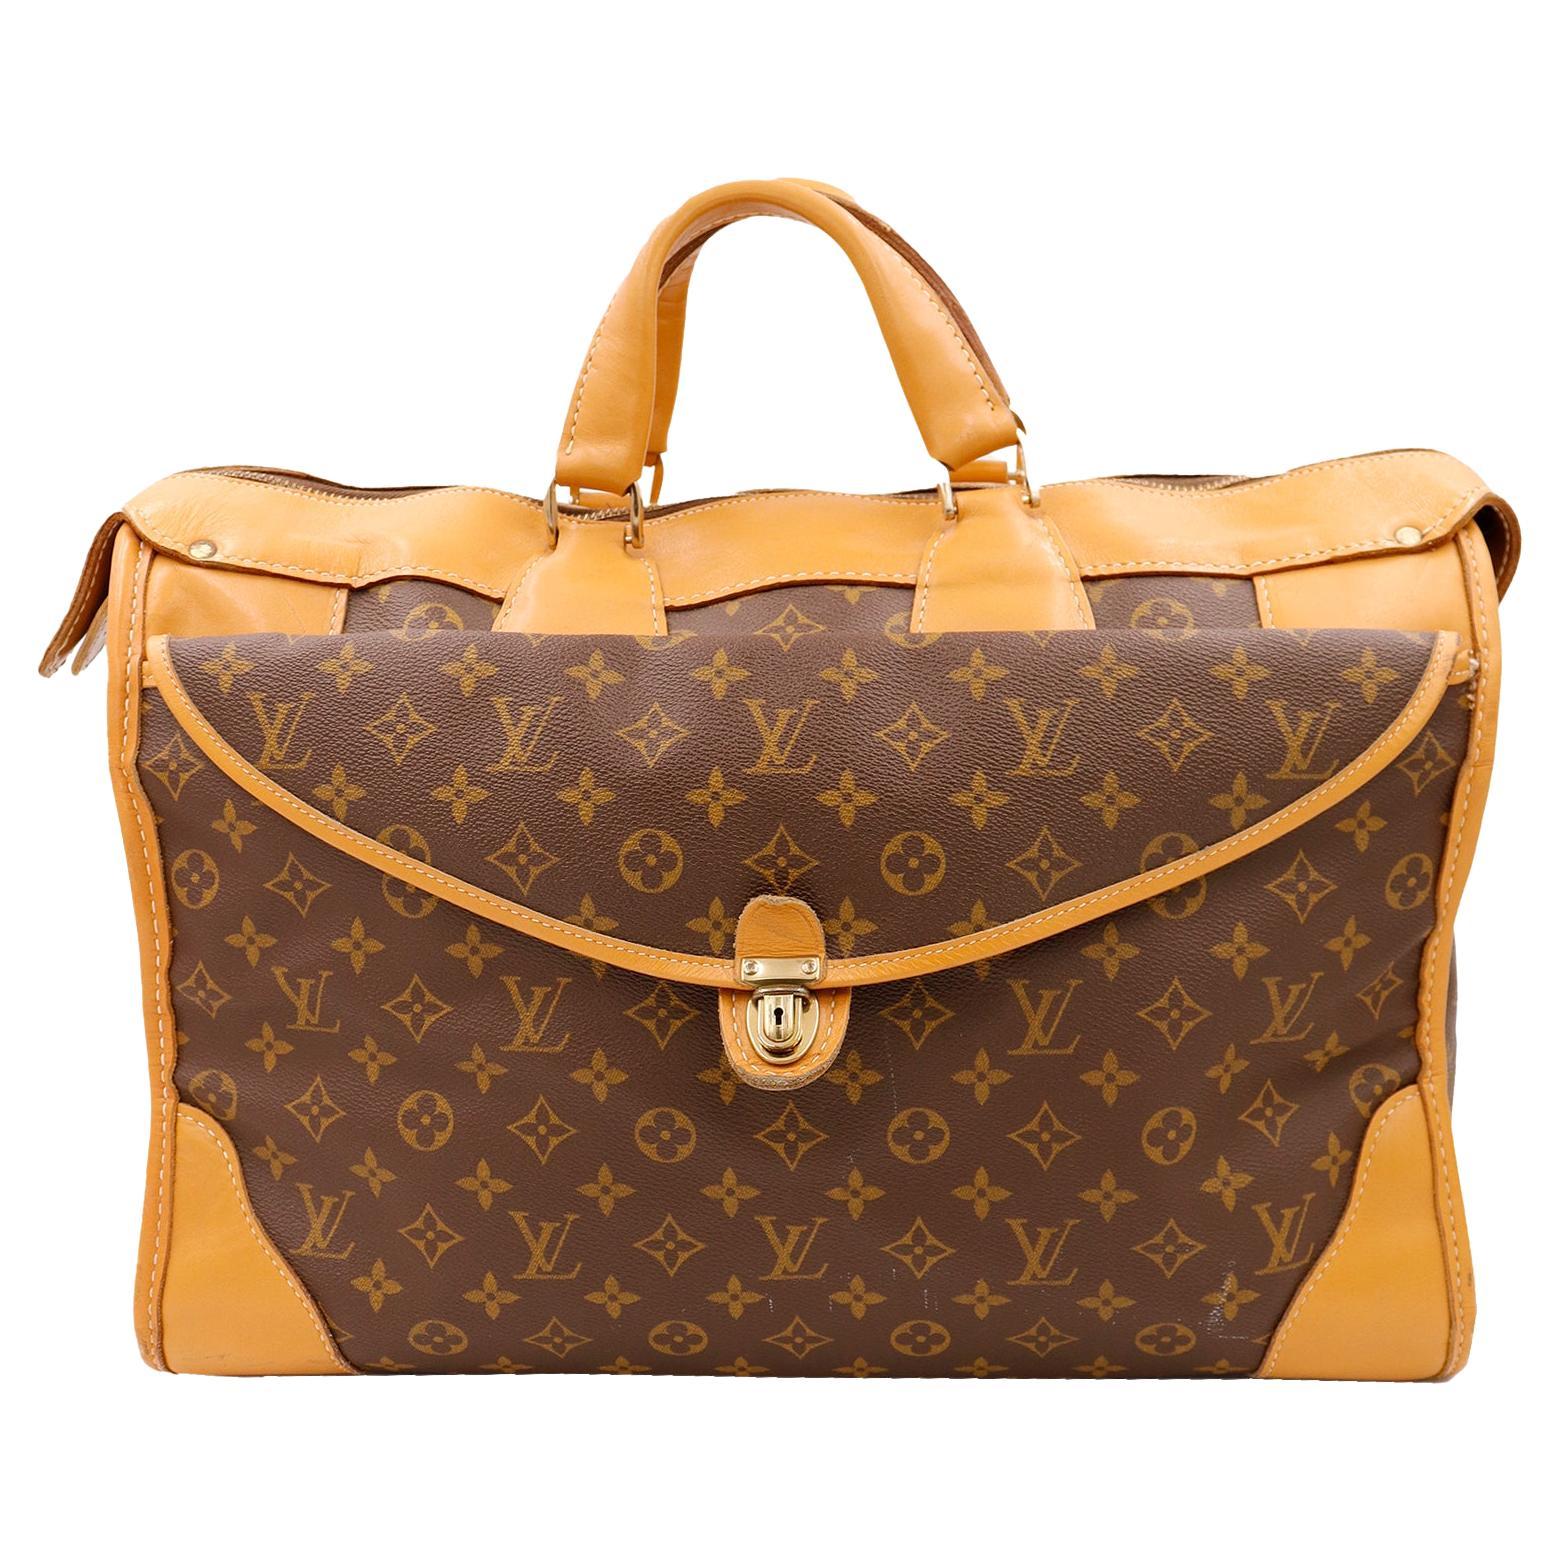 What are the most rare Louis Vuitton bags? - Questions & Answers